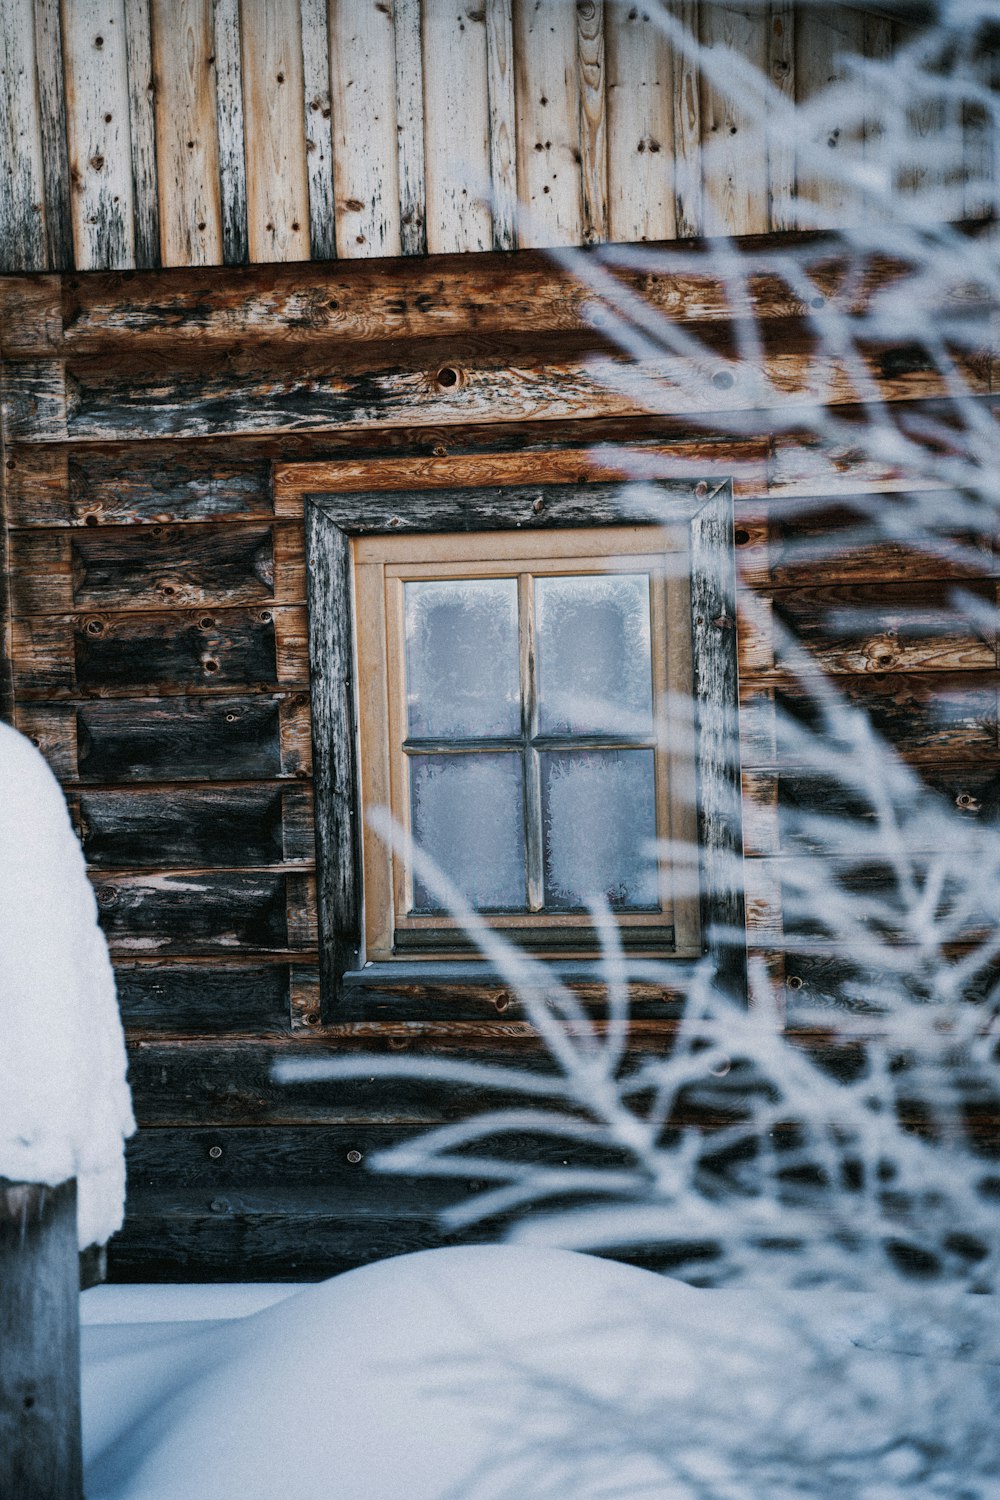 a log cabin with snow on the ground and a window